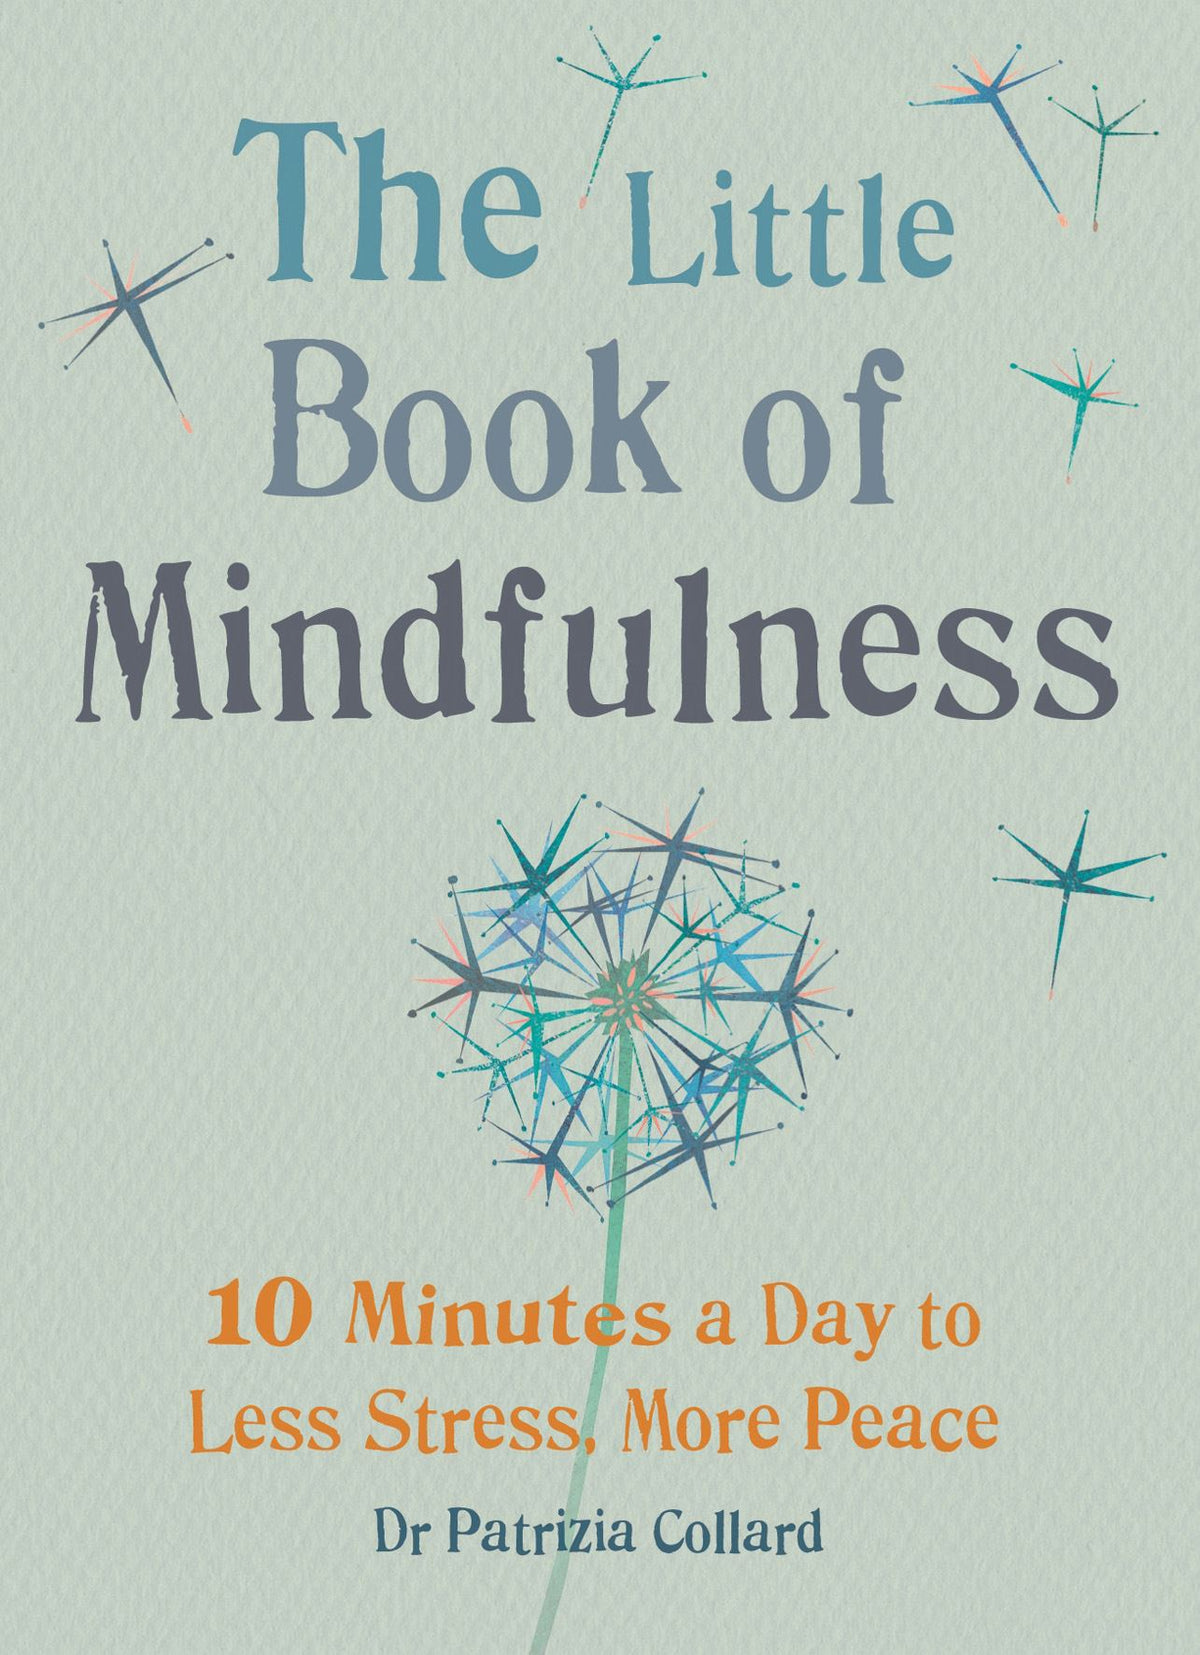 Book - Little Book of Mindfulness